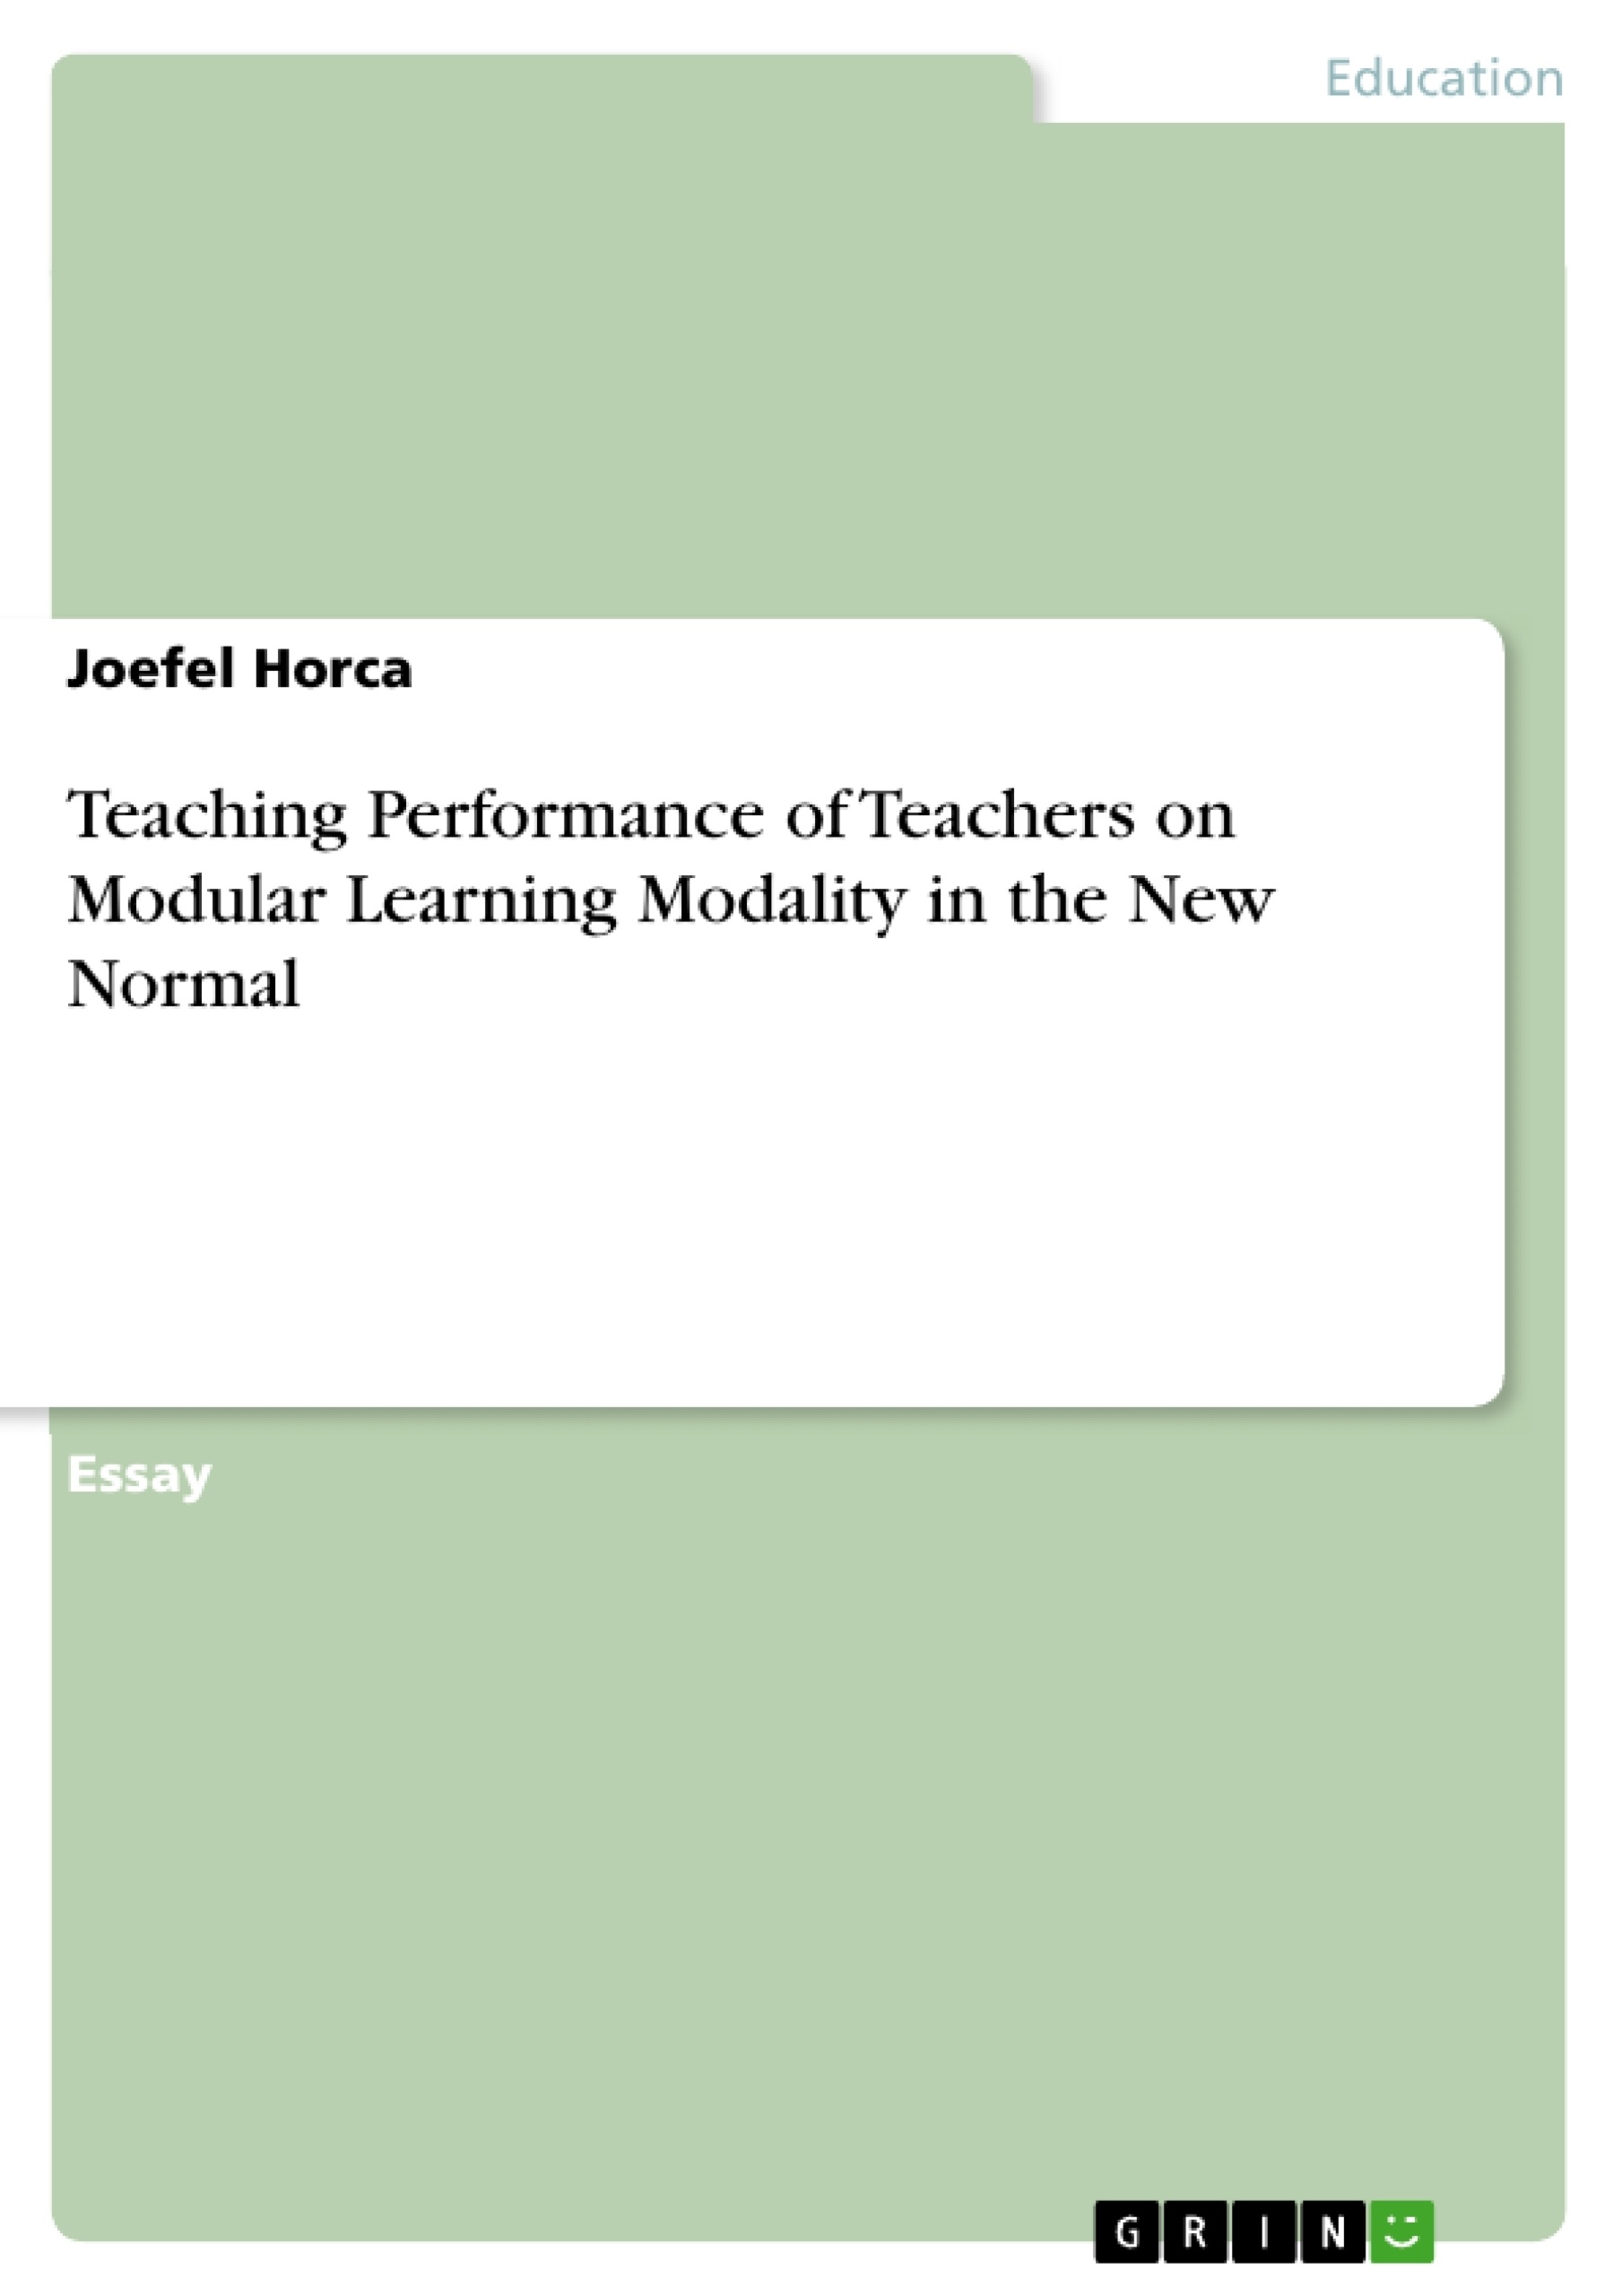 Title: Teaching Performance of Teachers on Modular Learning Modality in the New Normal